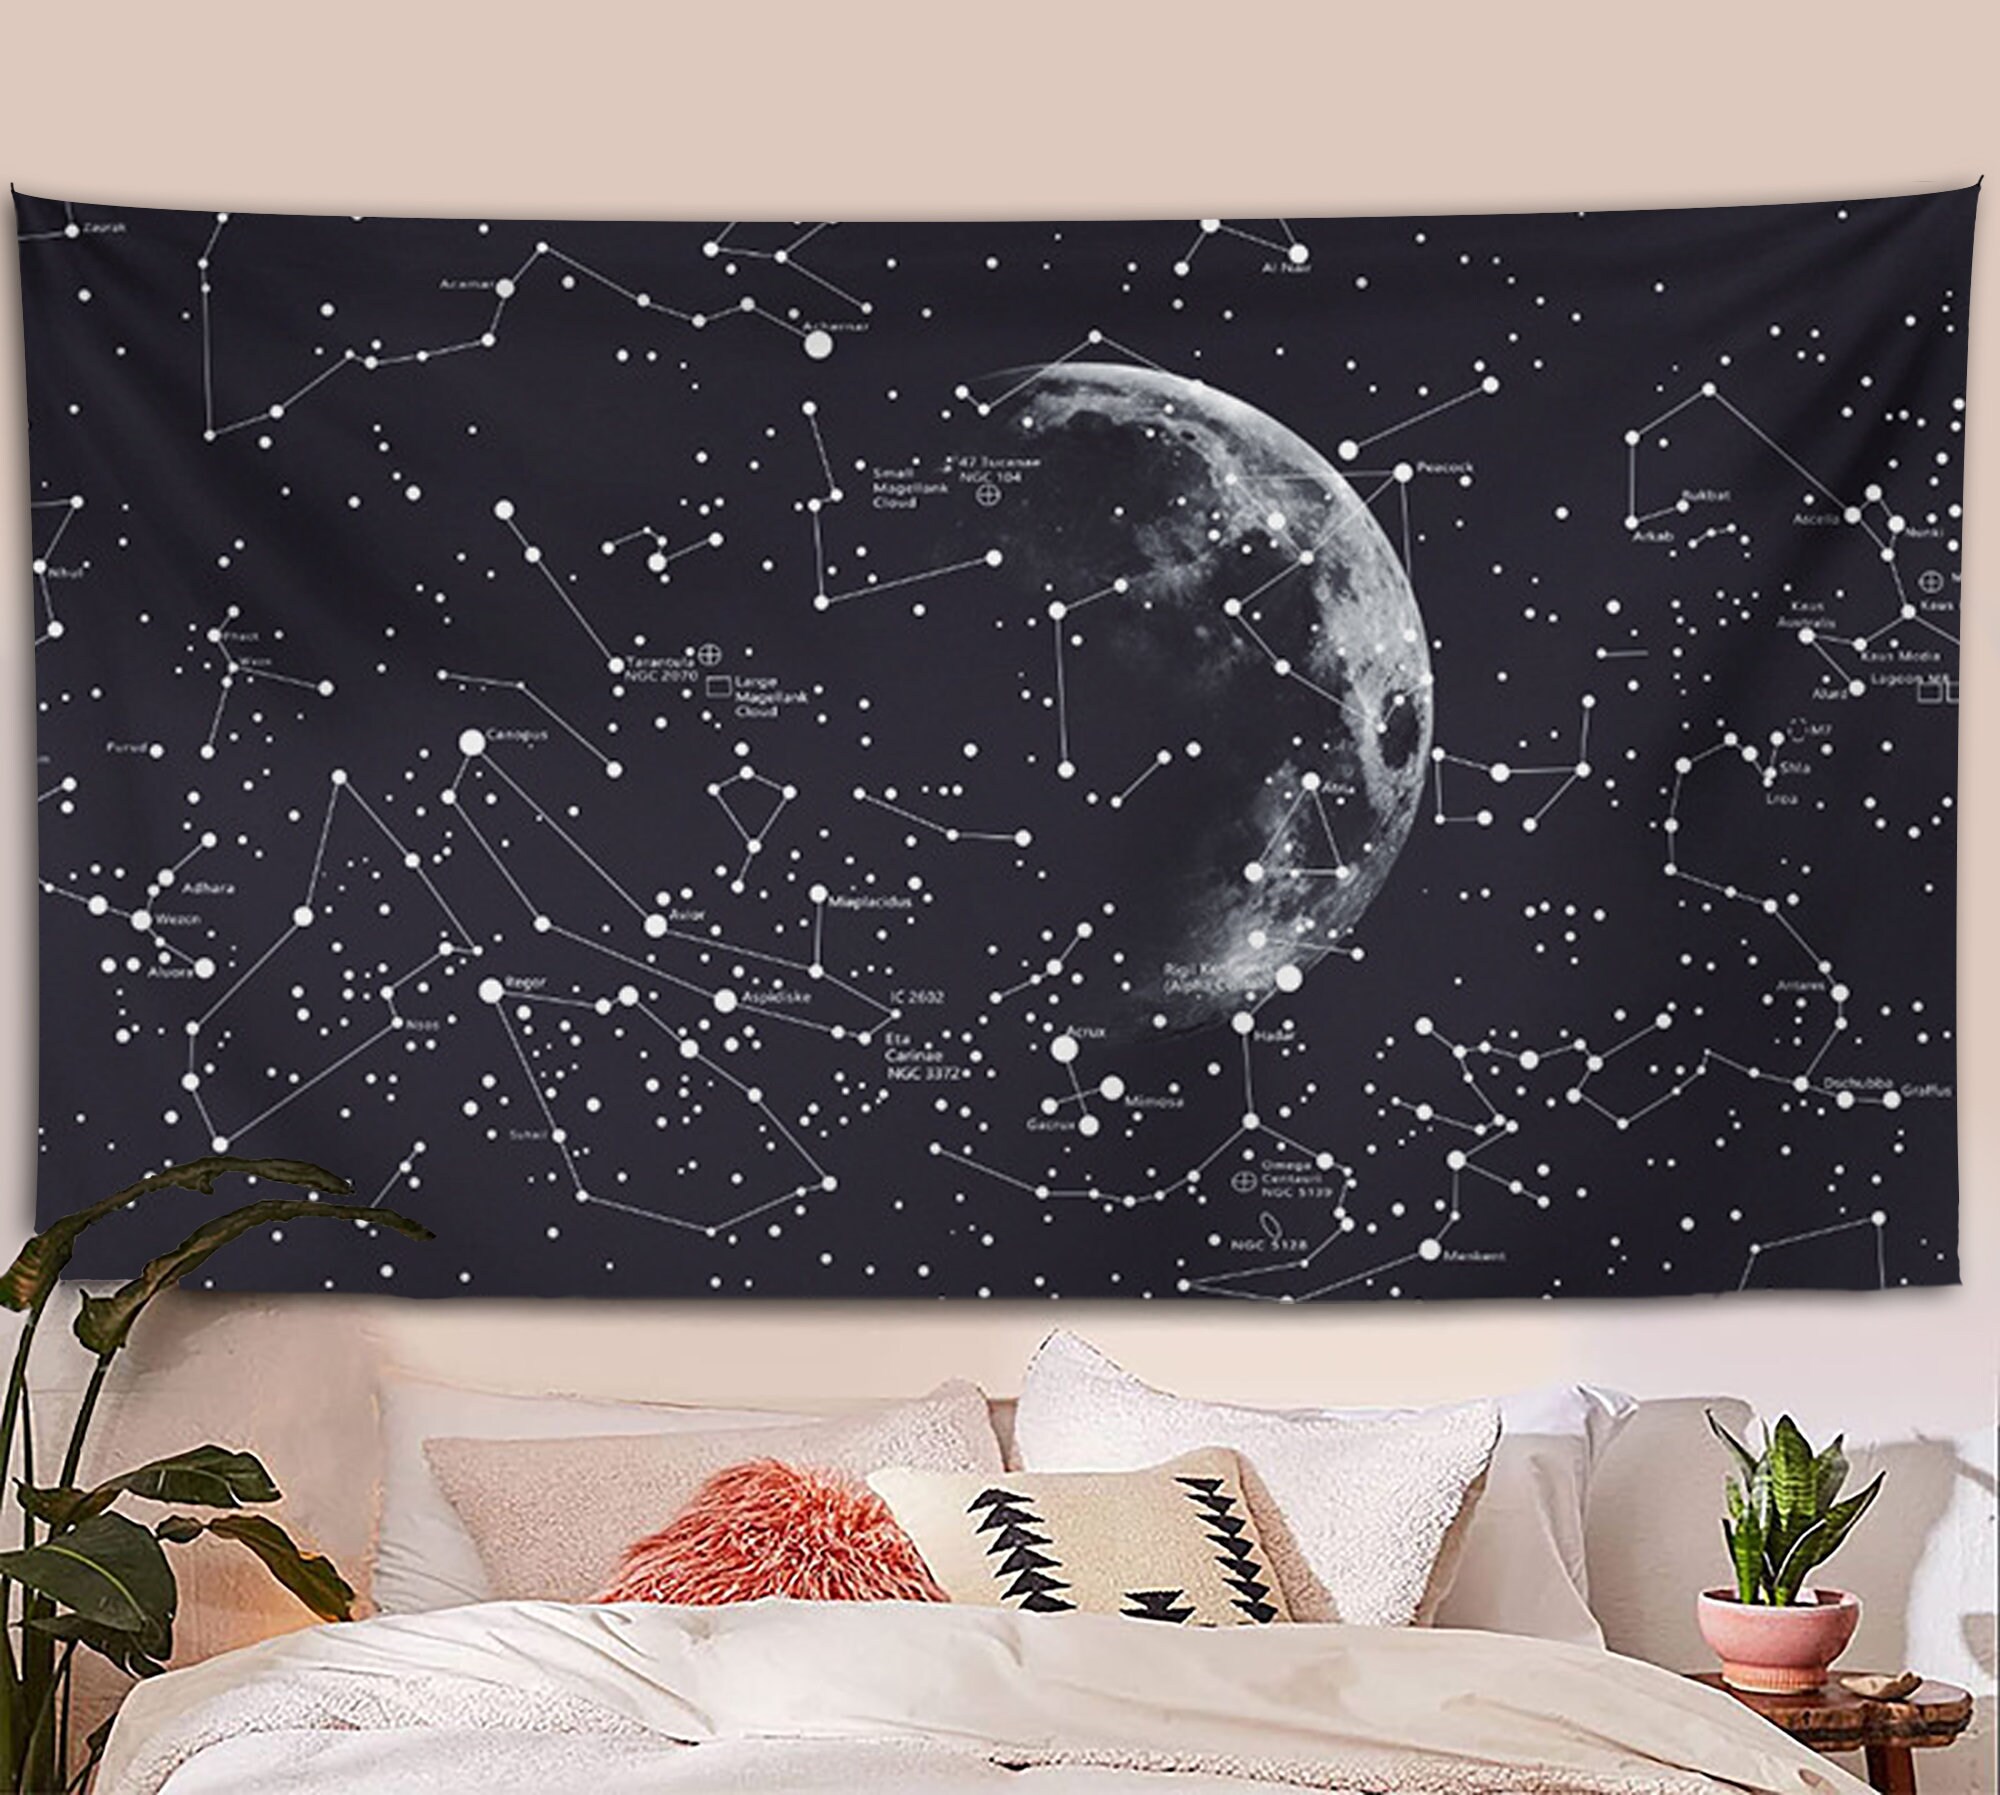 Discover Moon Constellations Tapestry,Astrology Tapestry,Starry Sky Tapestry,Moon Tapestry,Universe Tapestry,Space Tapestry,Black White Tapestry,Gift